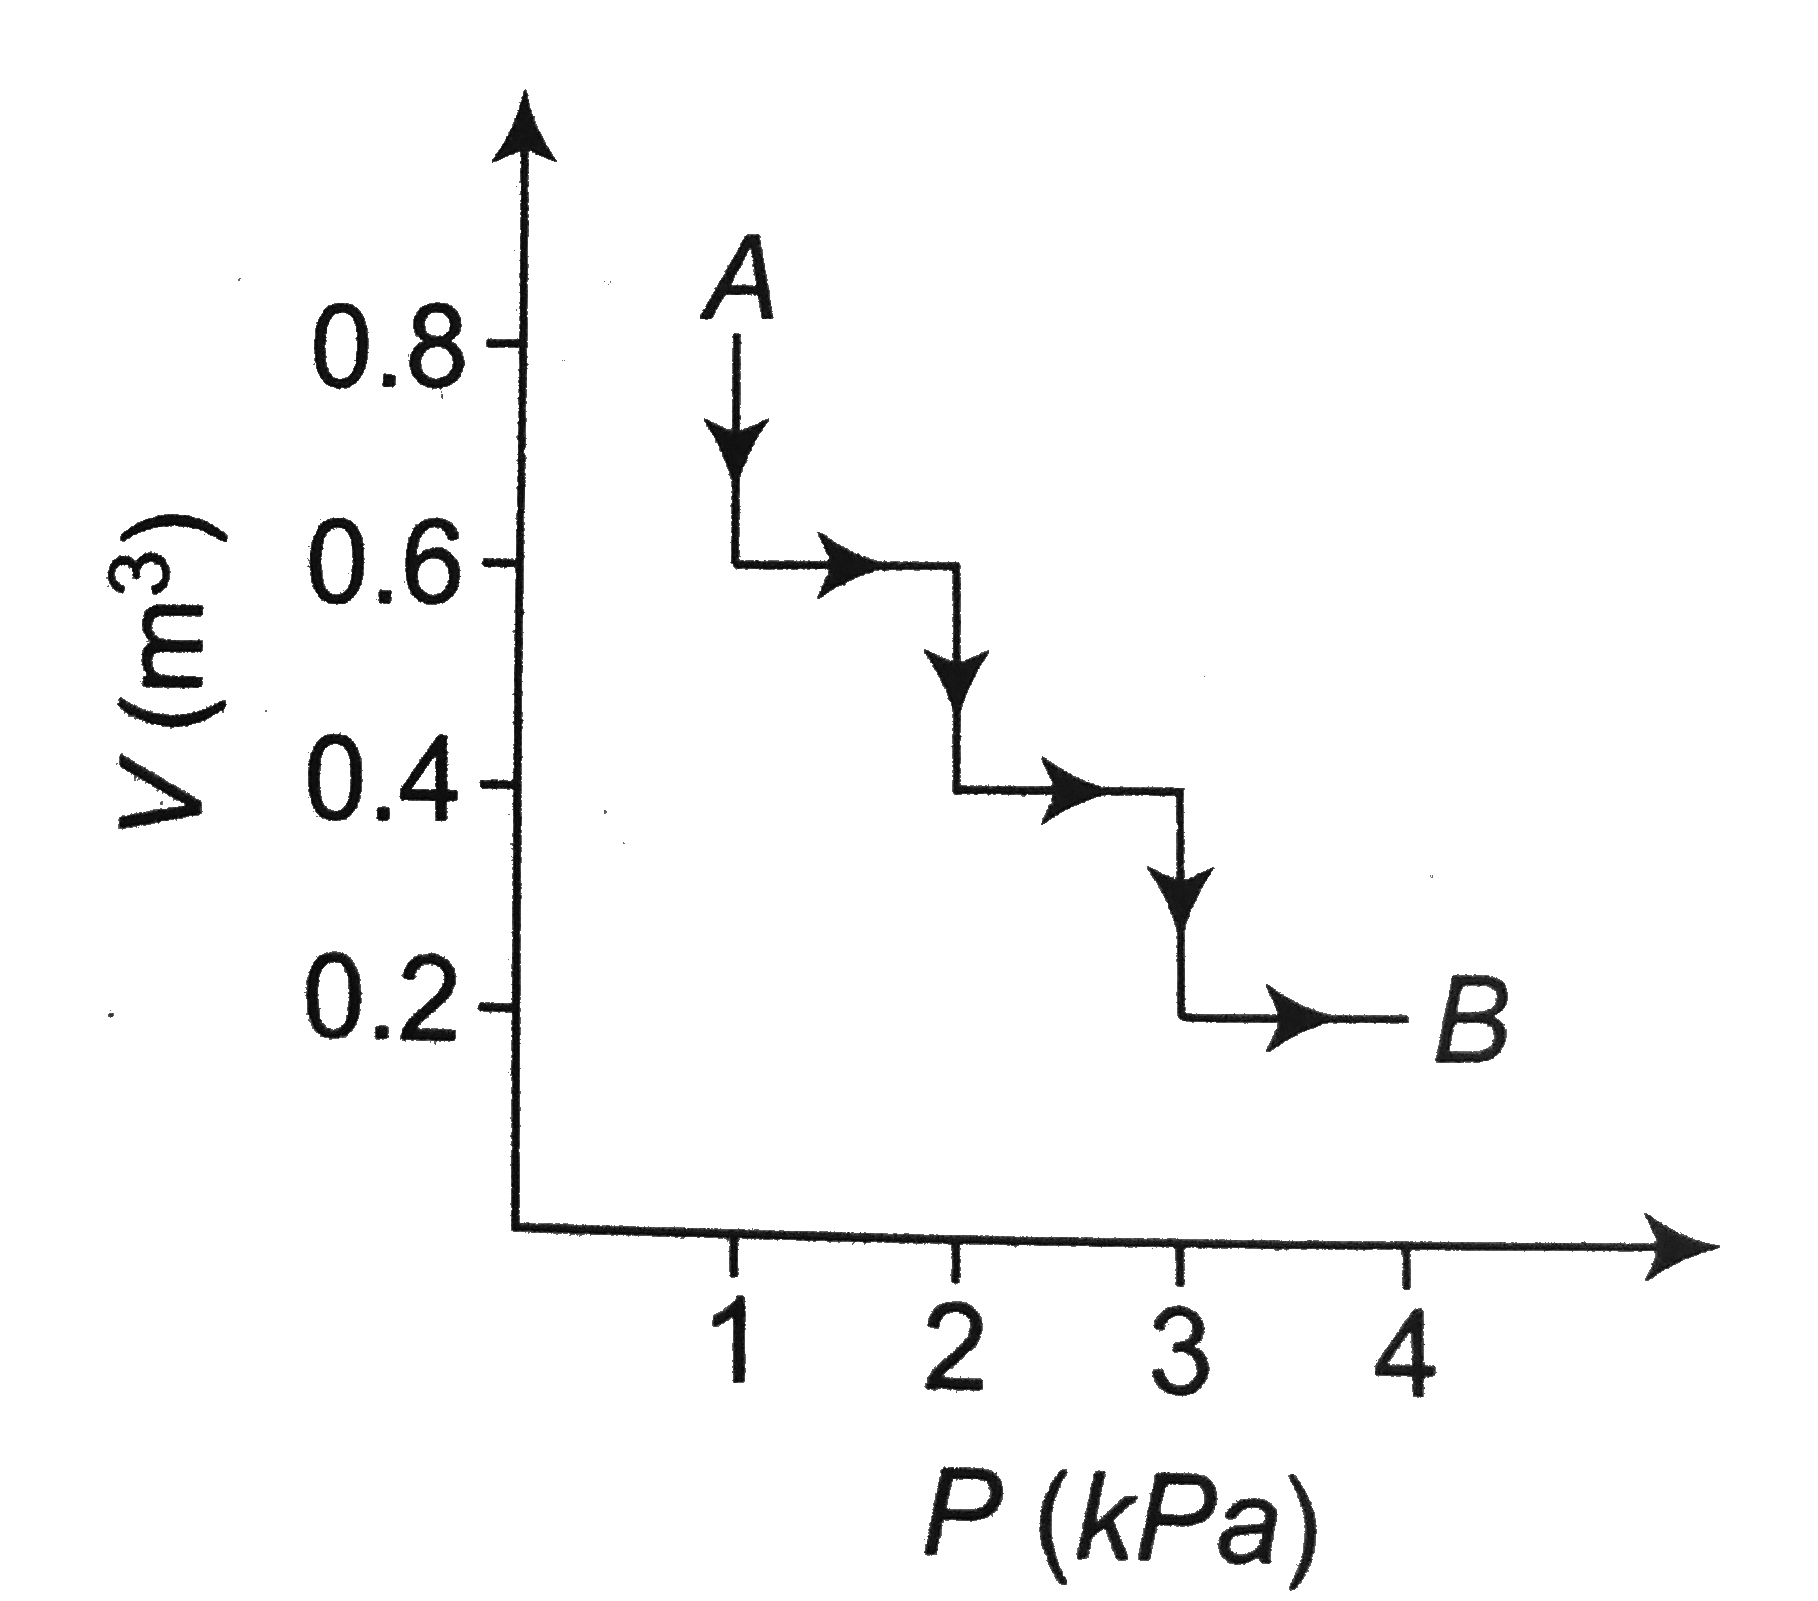 An ideal gas is taken along the path AB as shown in the figure. The work done by the gas is